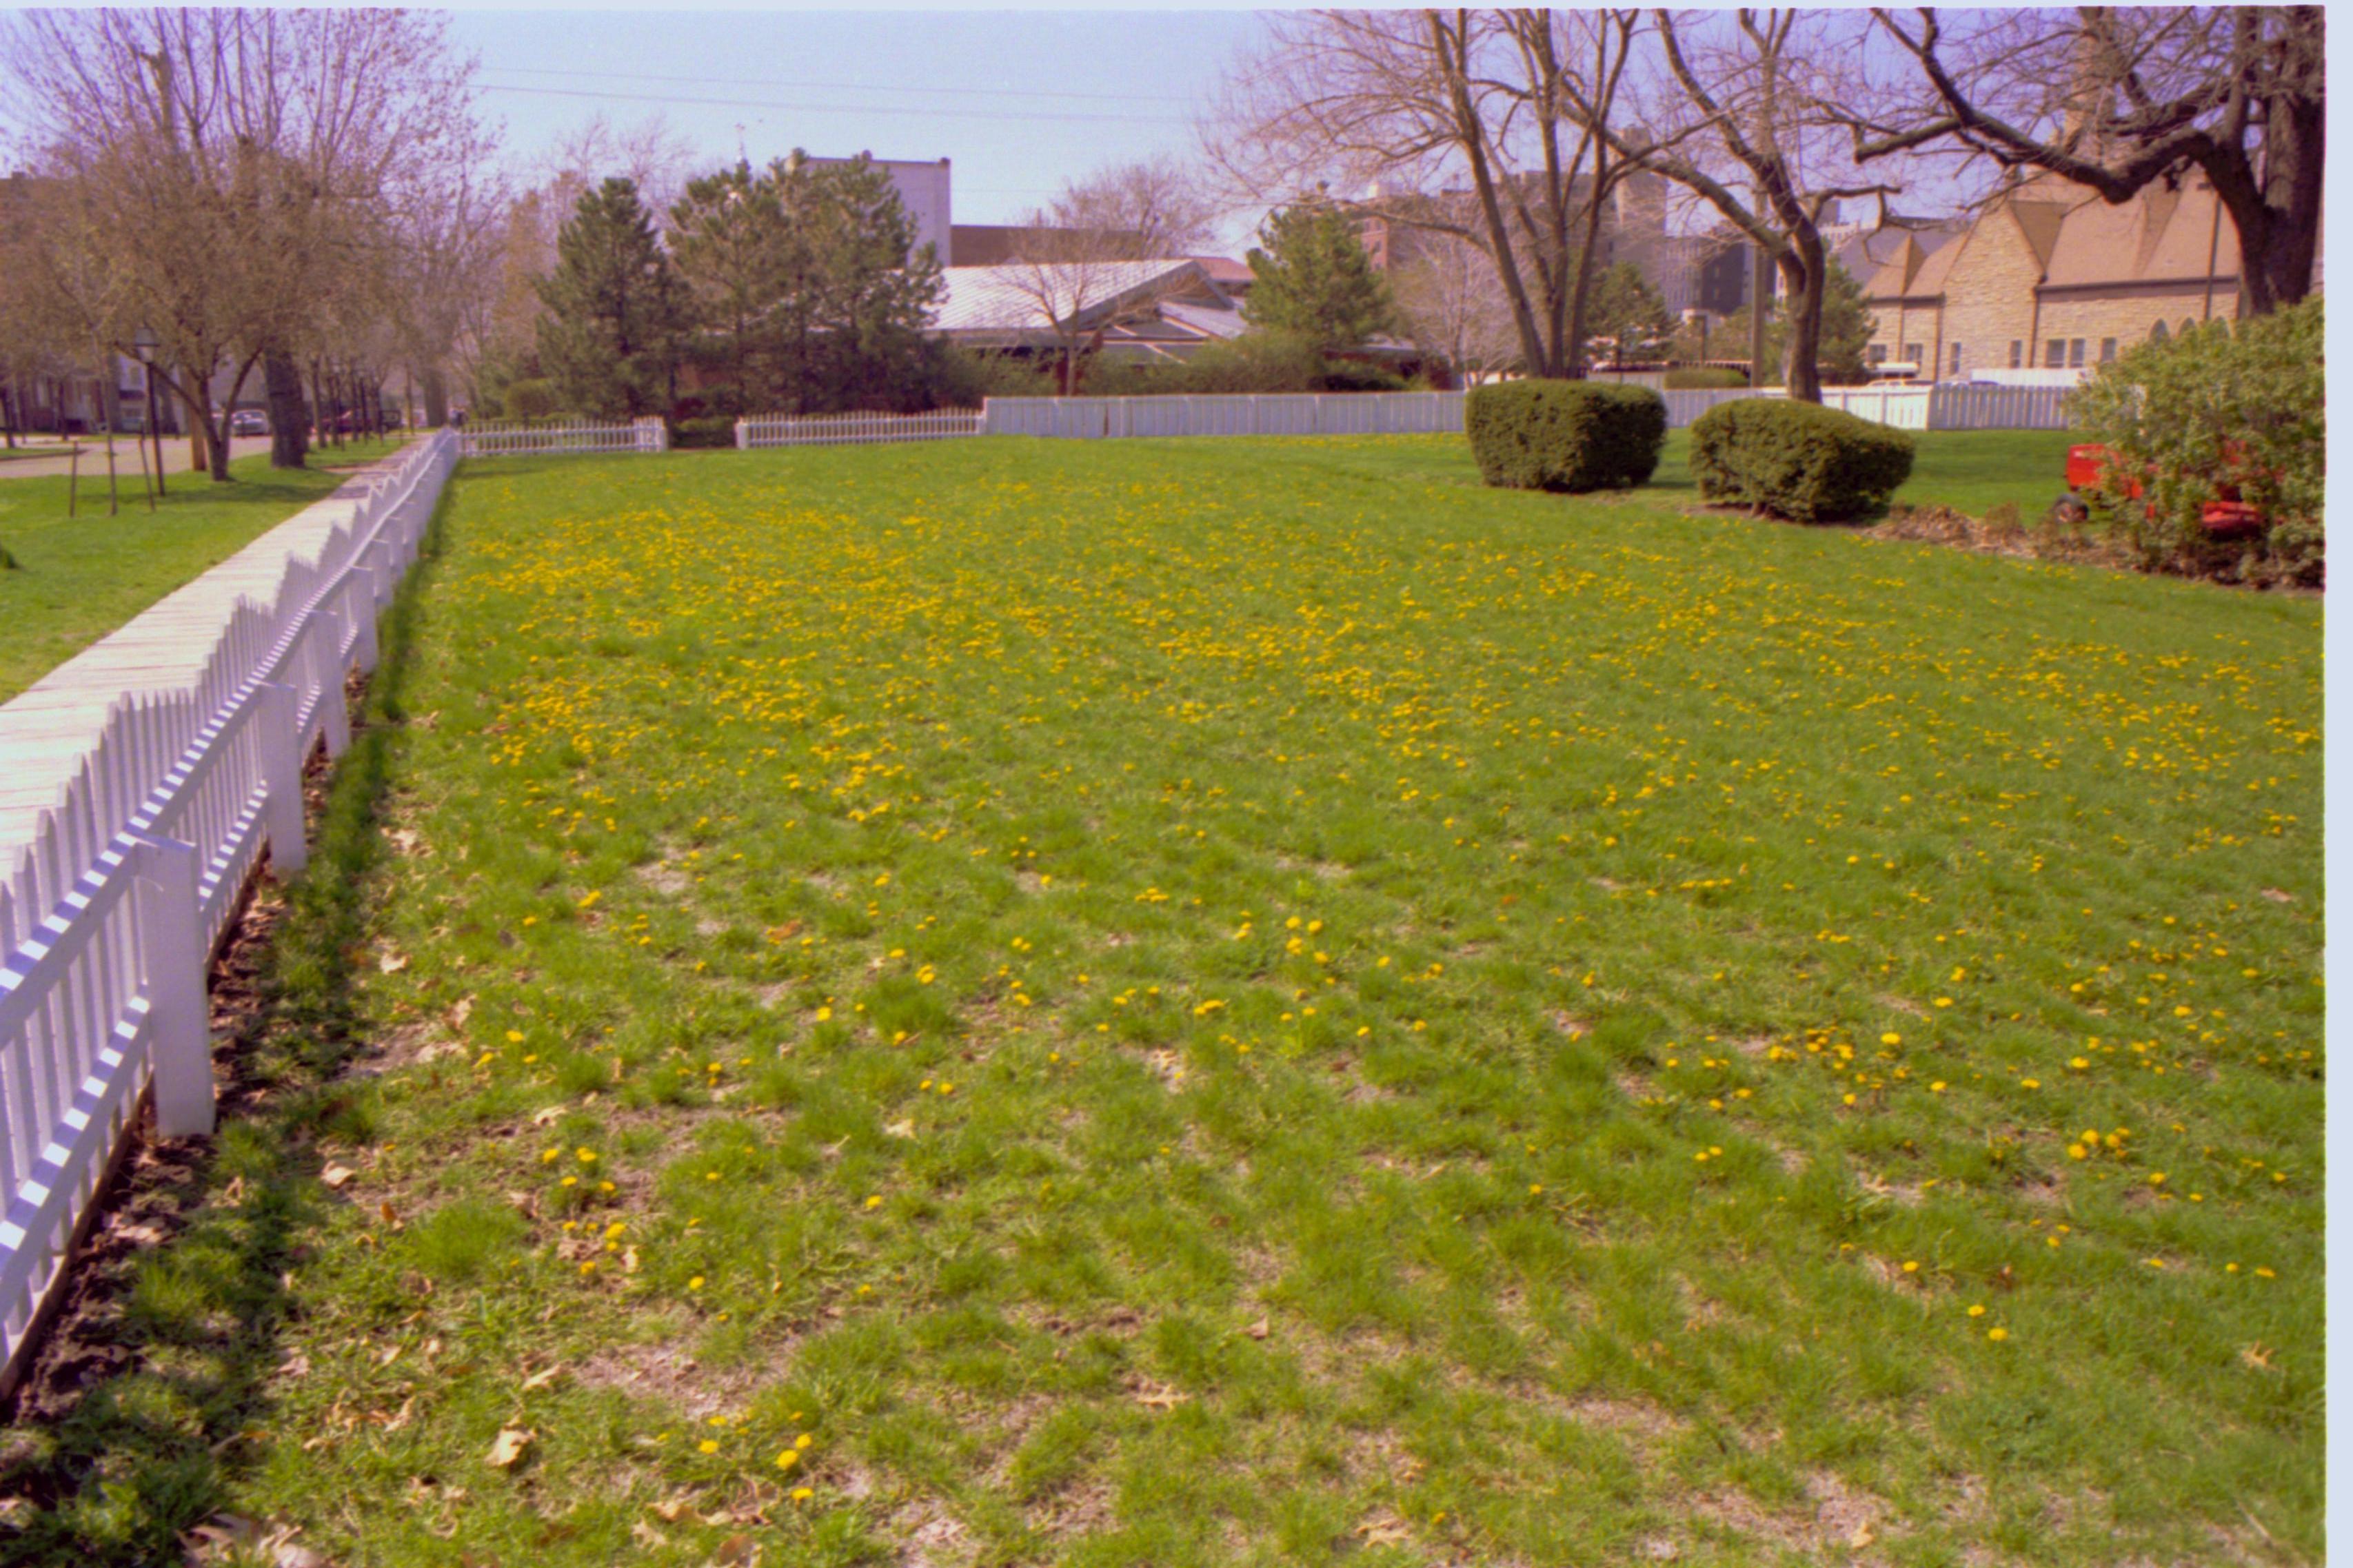 NA 6; 19A; Lawns and trees around park, late 1980s Interpritation, Trees